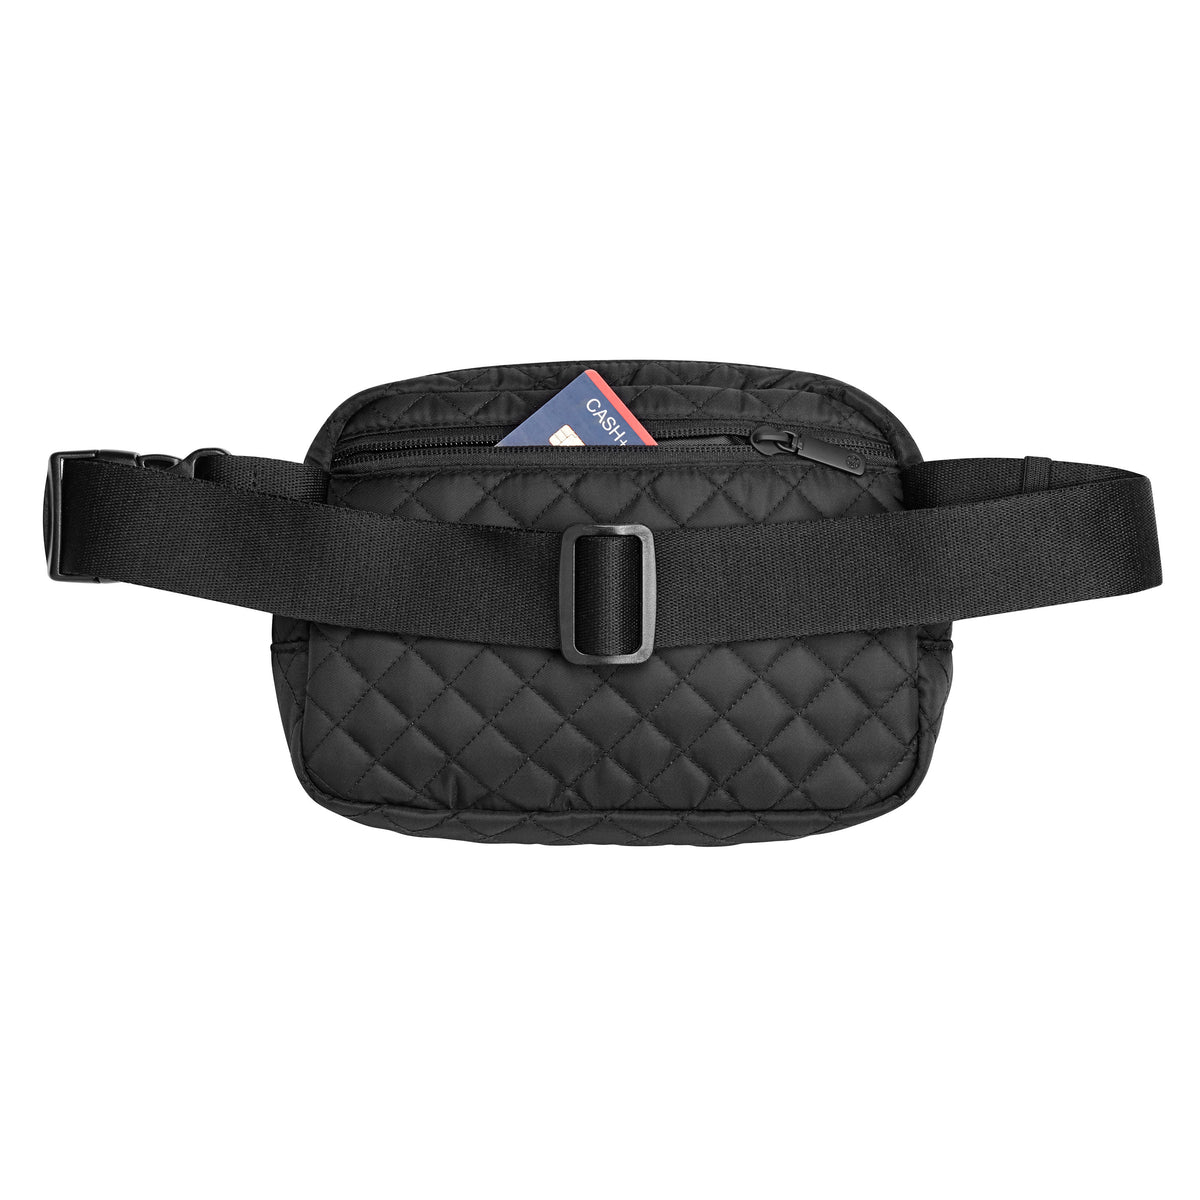 Gaiam Sidekick Waist Pack - Quilted XL back with stuffing